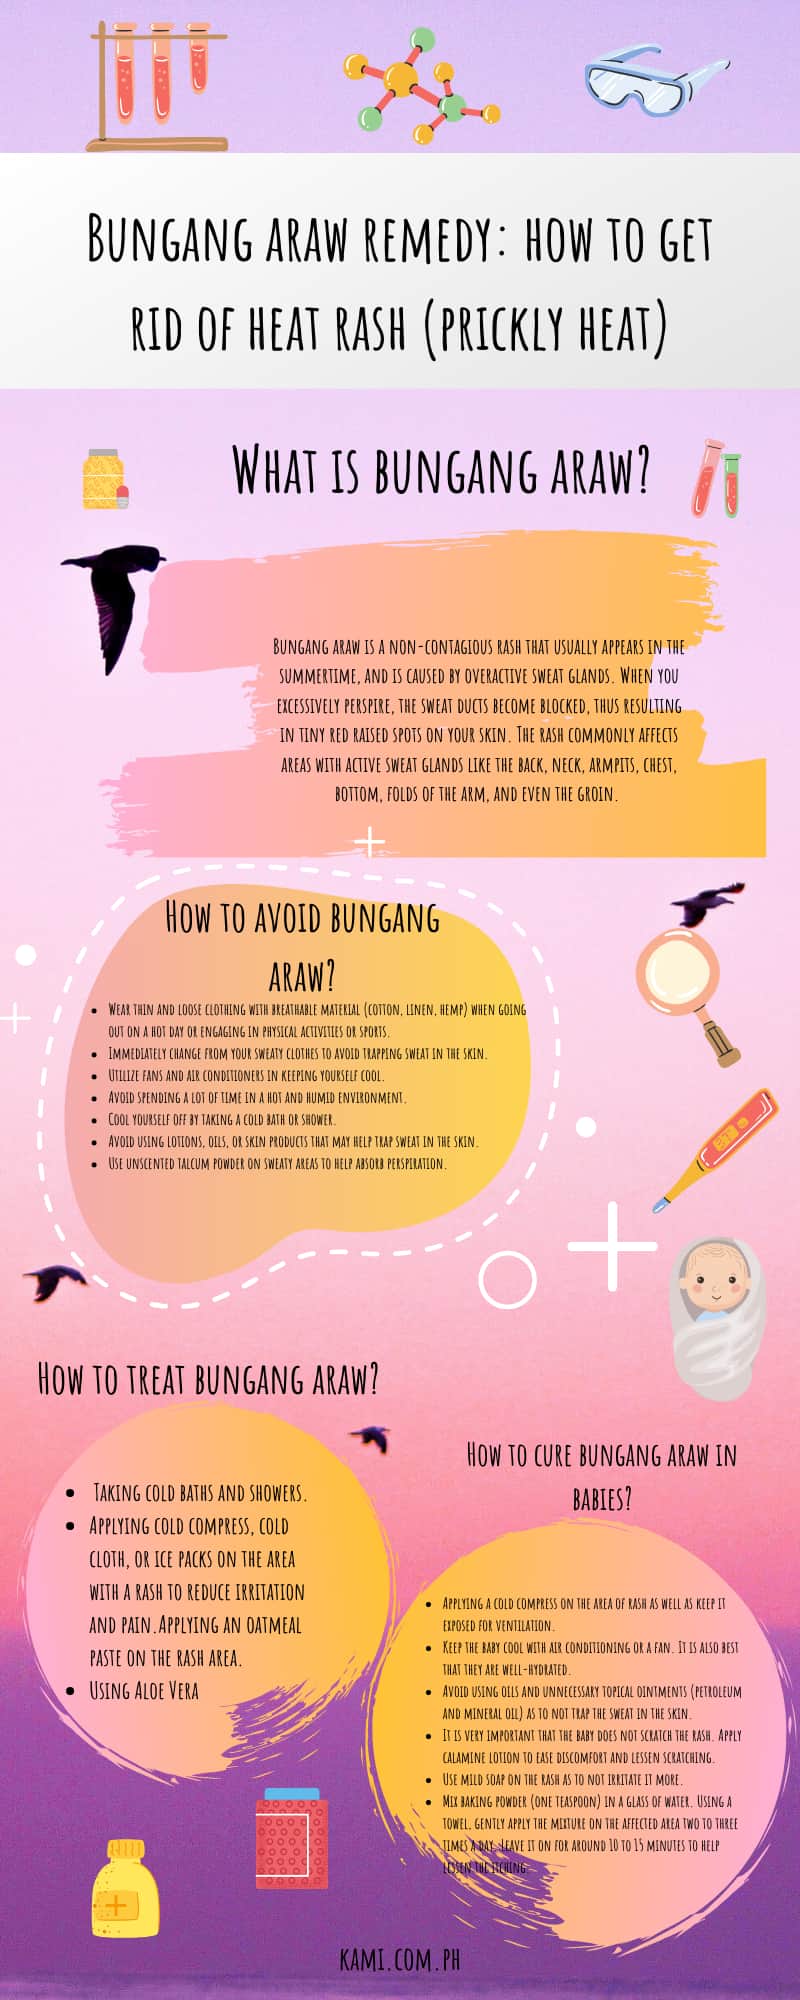 Bungang araw remedy: how to get rid of heat rash (prickly heat)